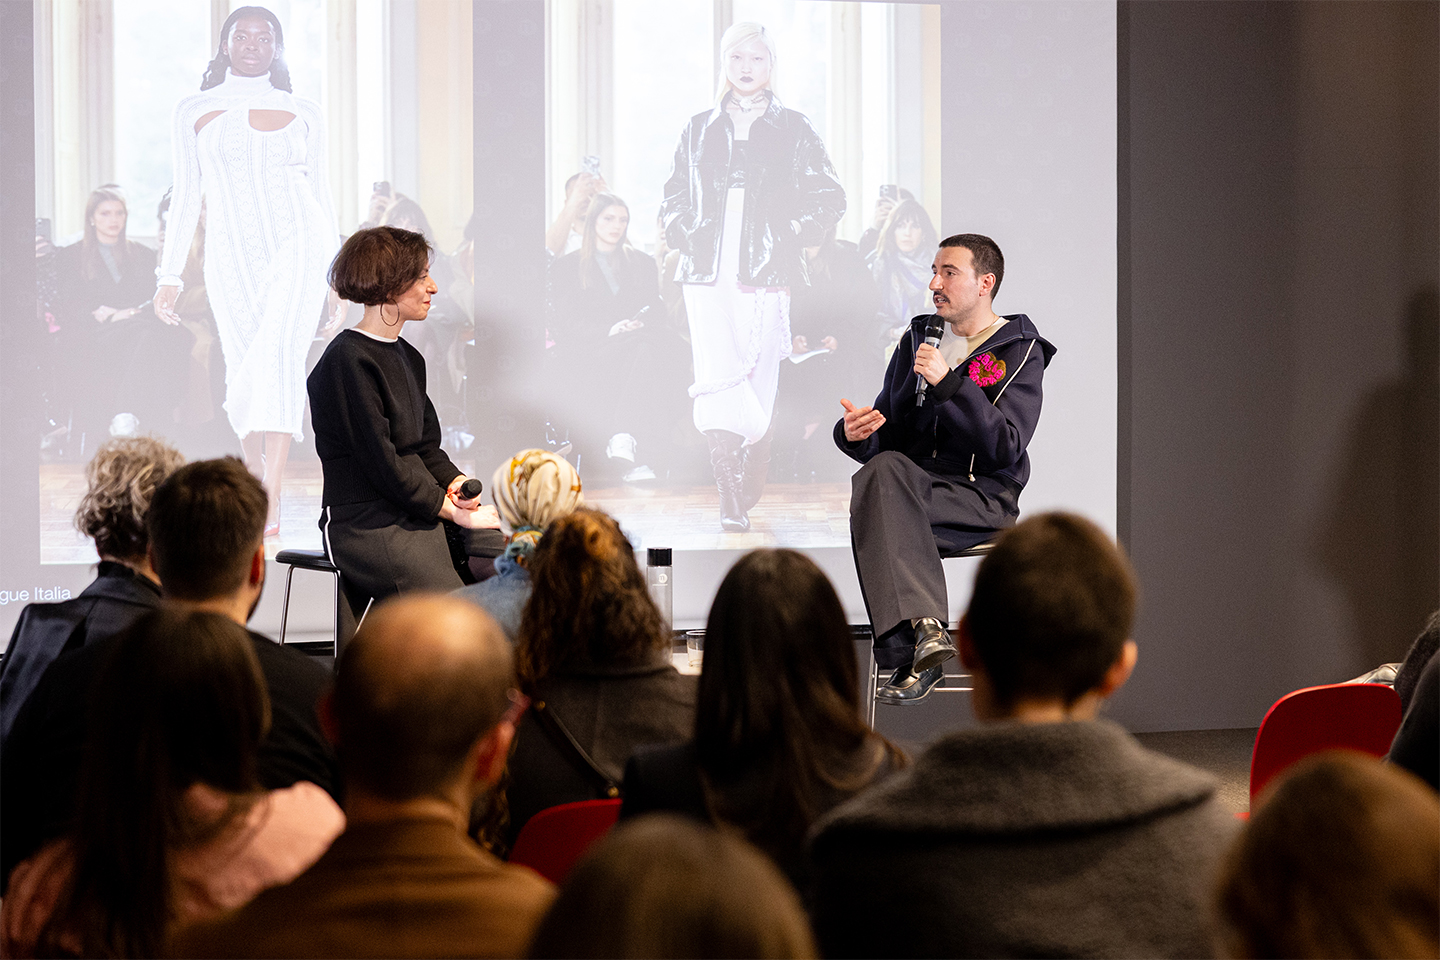 Italian designer Marco Rambaldi, a guest speaker at the "Inverse Fashion" talk during the "Hyper Essentialism" Front Row event hosted by Istituto Marangoni Milano